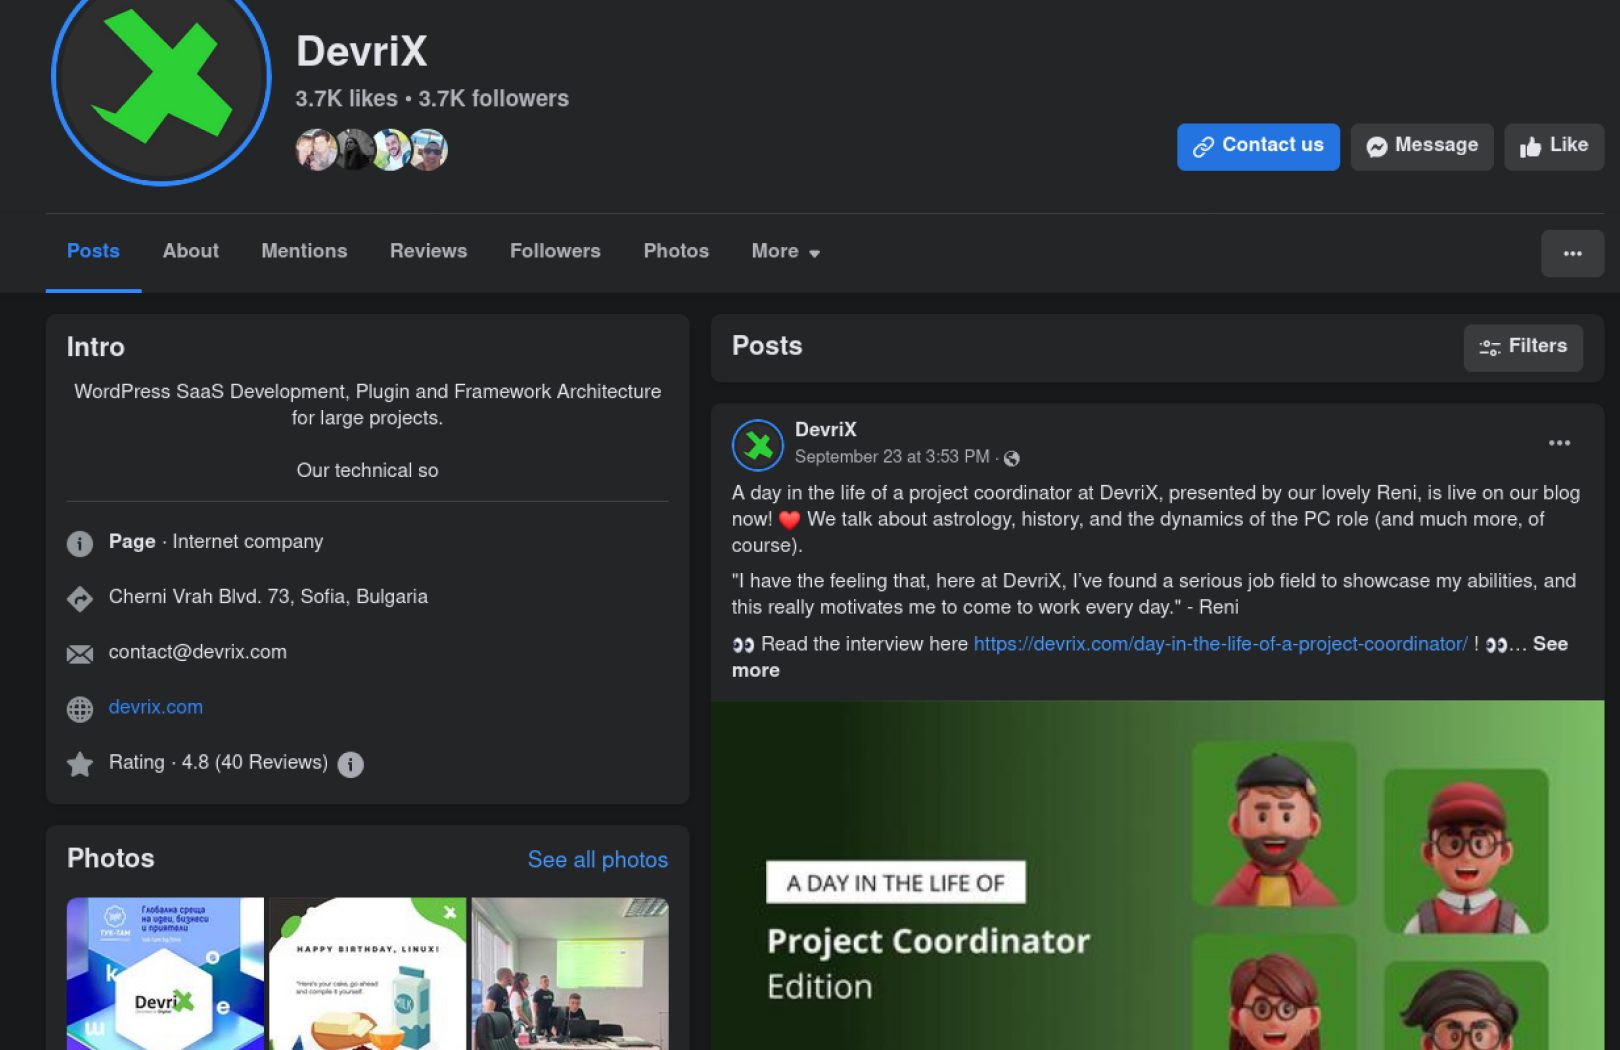 Screenshot of DevriX Facebook Page showcasing the 'About' section, which includes the company intro mentioning WordPress SaaS Development, Plugin and Framework Architecture for large projects, and contact information. The page highlights the importance of optimizing Facebook page website links for increased traffic, featuring visible 'Contact us' and 'Message' buttons, as well as a sample engaging post with a link to a blog interview. The page has 3.7k likes and followers.